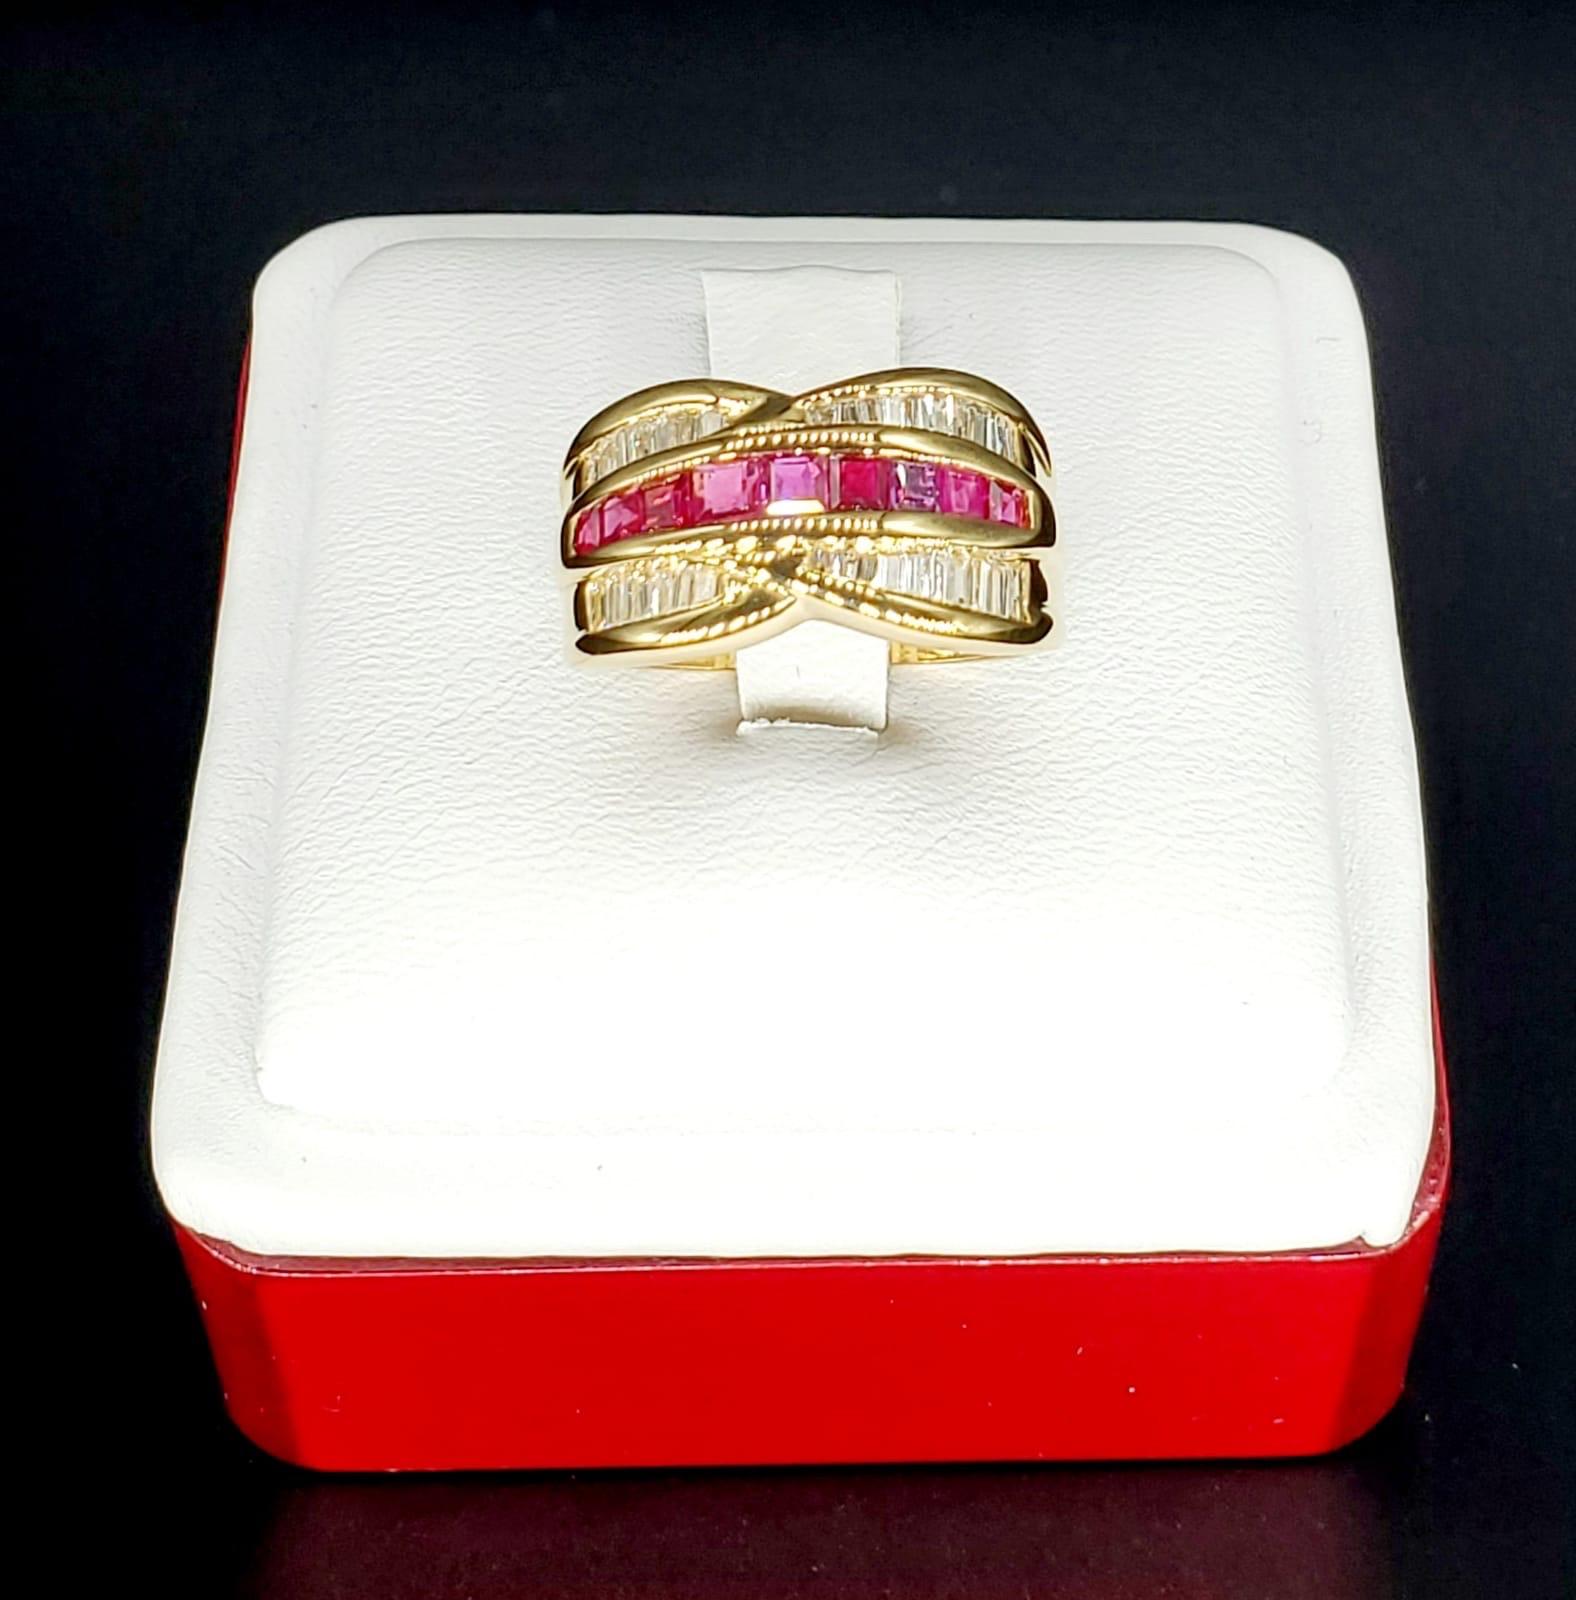 Gorgeous and luxurious, outstanding 2 carat diamonds & Ruby ring perfect for any occasion. The diamonds are bright and white tapered baguettes totaling 1 carat and the Ruby’s total weight approx 1 carat as well. The ring is a size 6.5 and weights